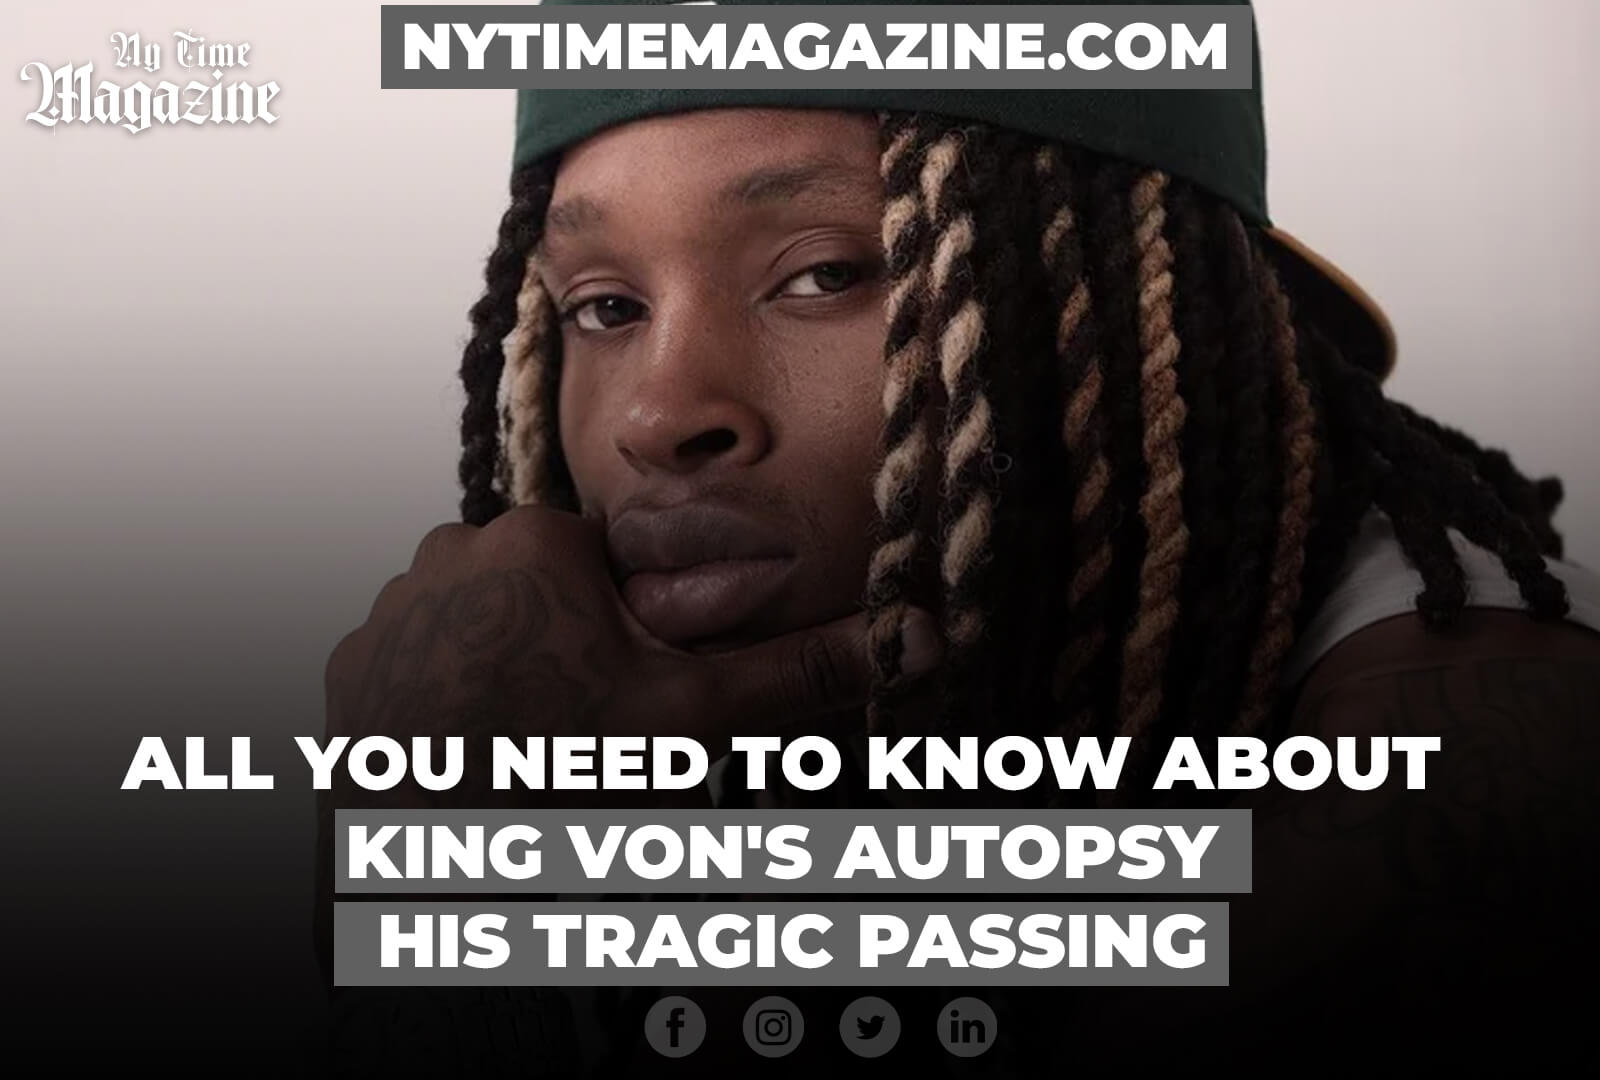 ALL YOU NEED TO KNOW ABOUT KING VONS AUTOPSY AND HIS TRAGIC PASSING